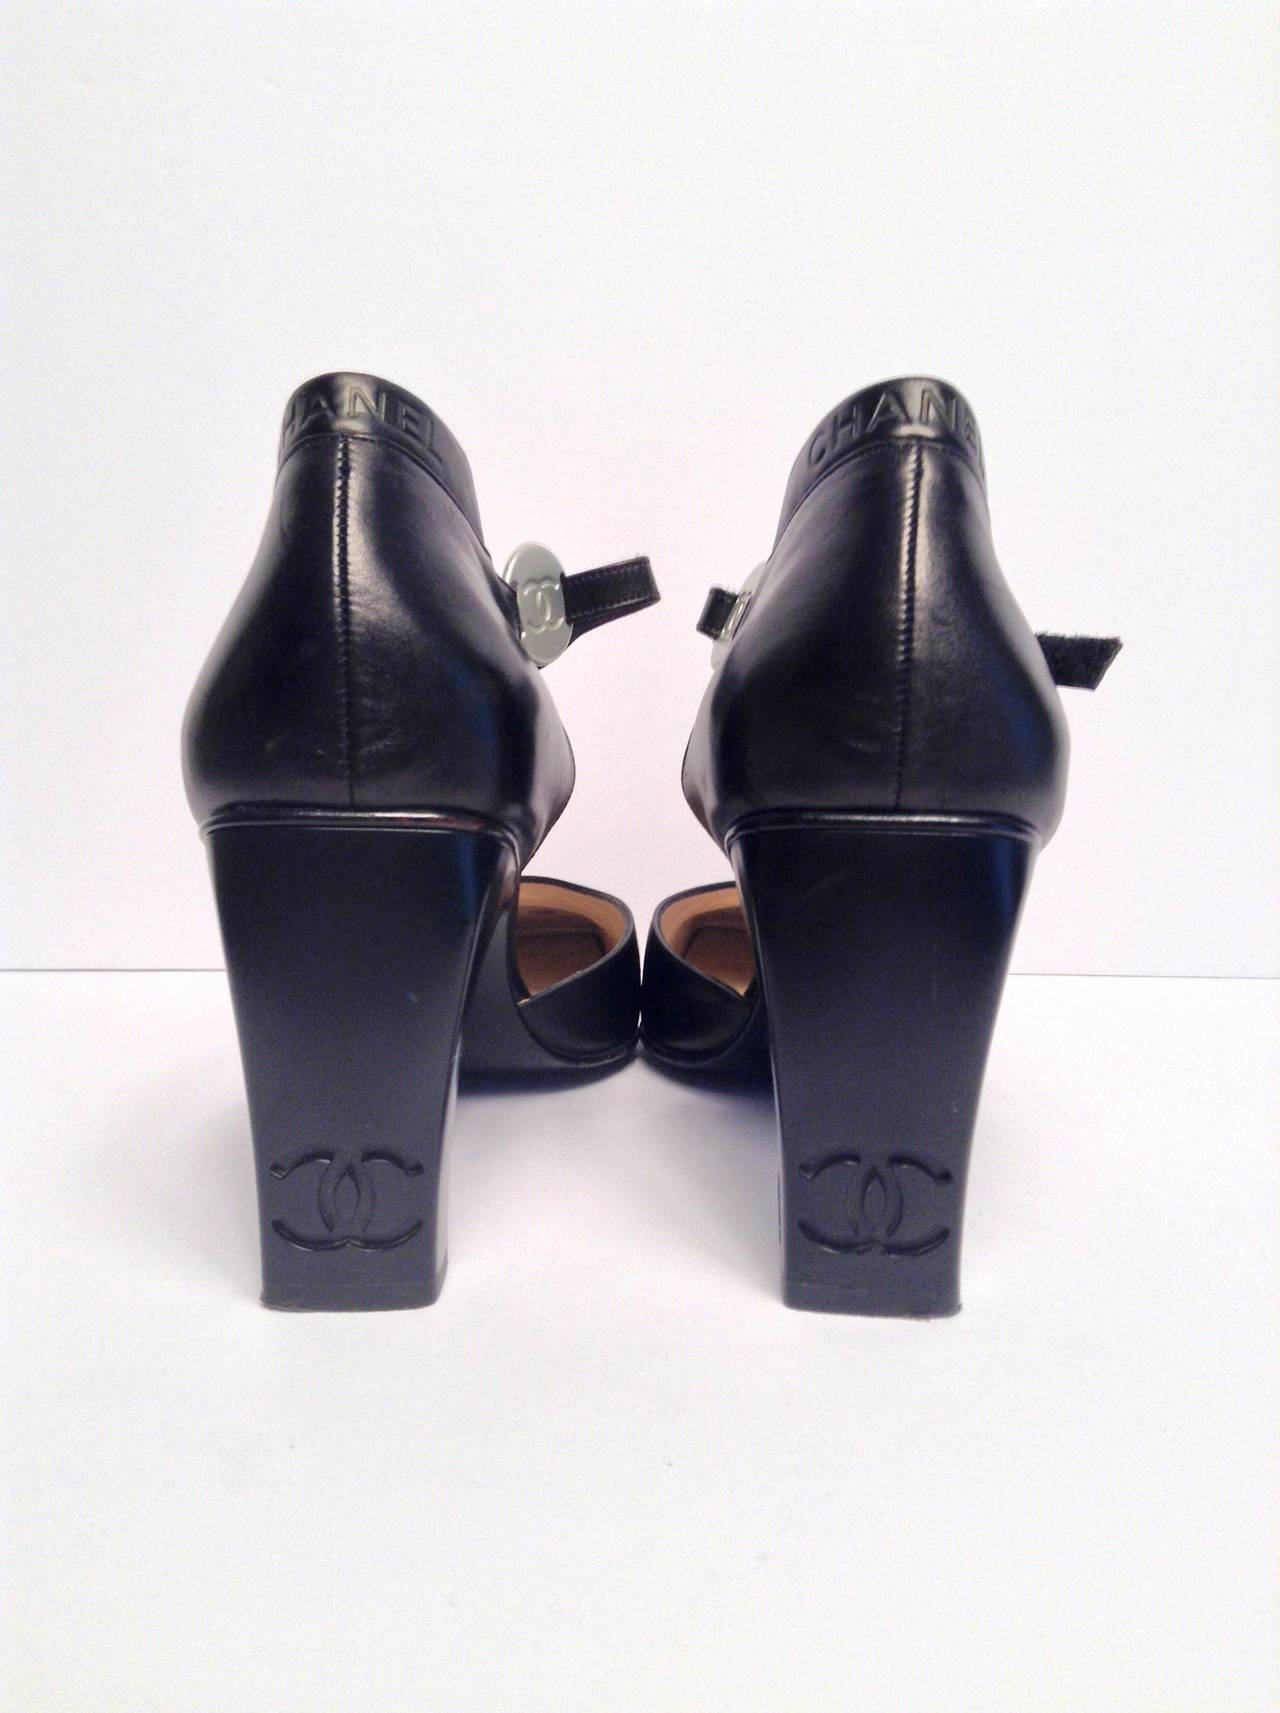 Chanel Black Leather Pumps Size 38 In Excellent Condition For Sale In Toronto, Ontario